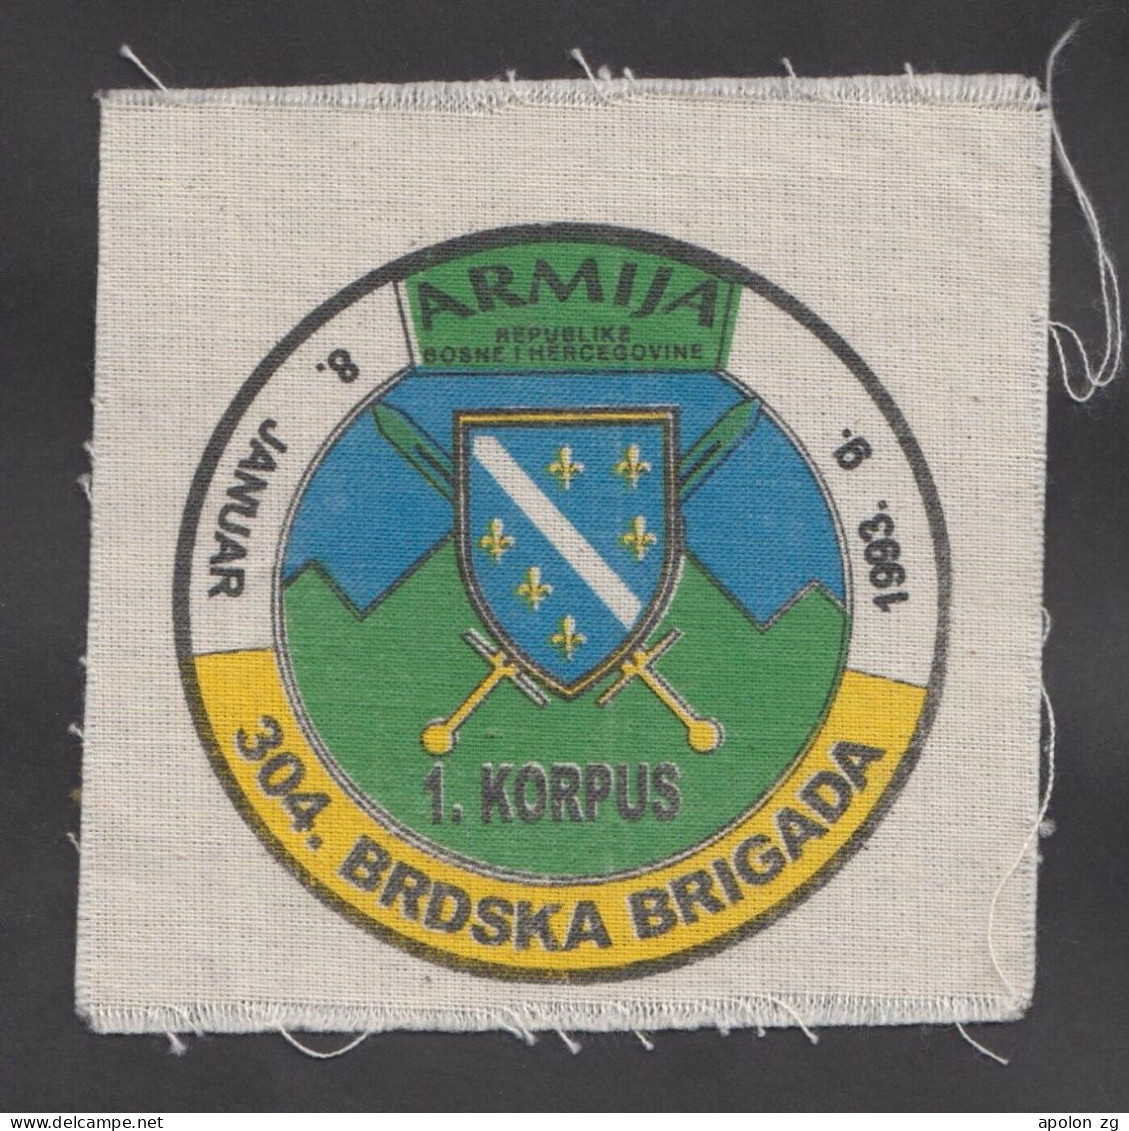 BOSNIA ARMY - 304. MOUNTAIN BRIGADE, 1ST CORPS , Rare Patch ! - Patches